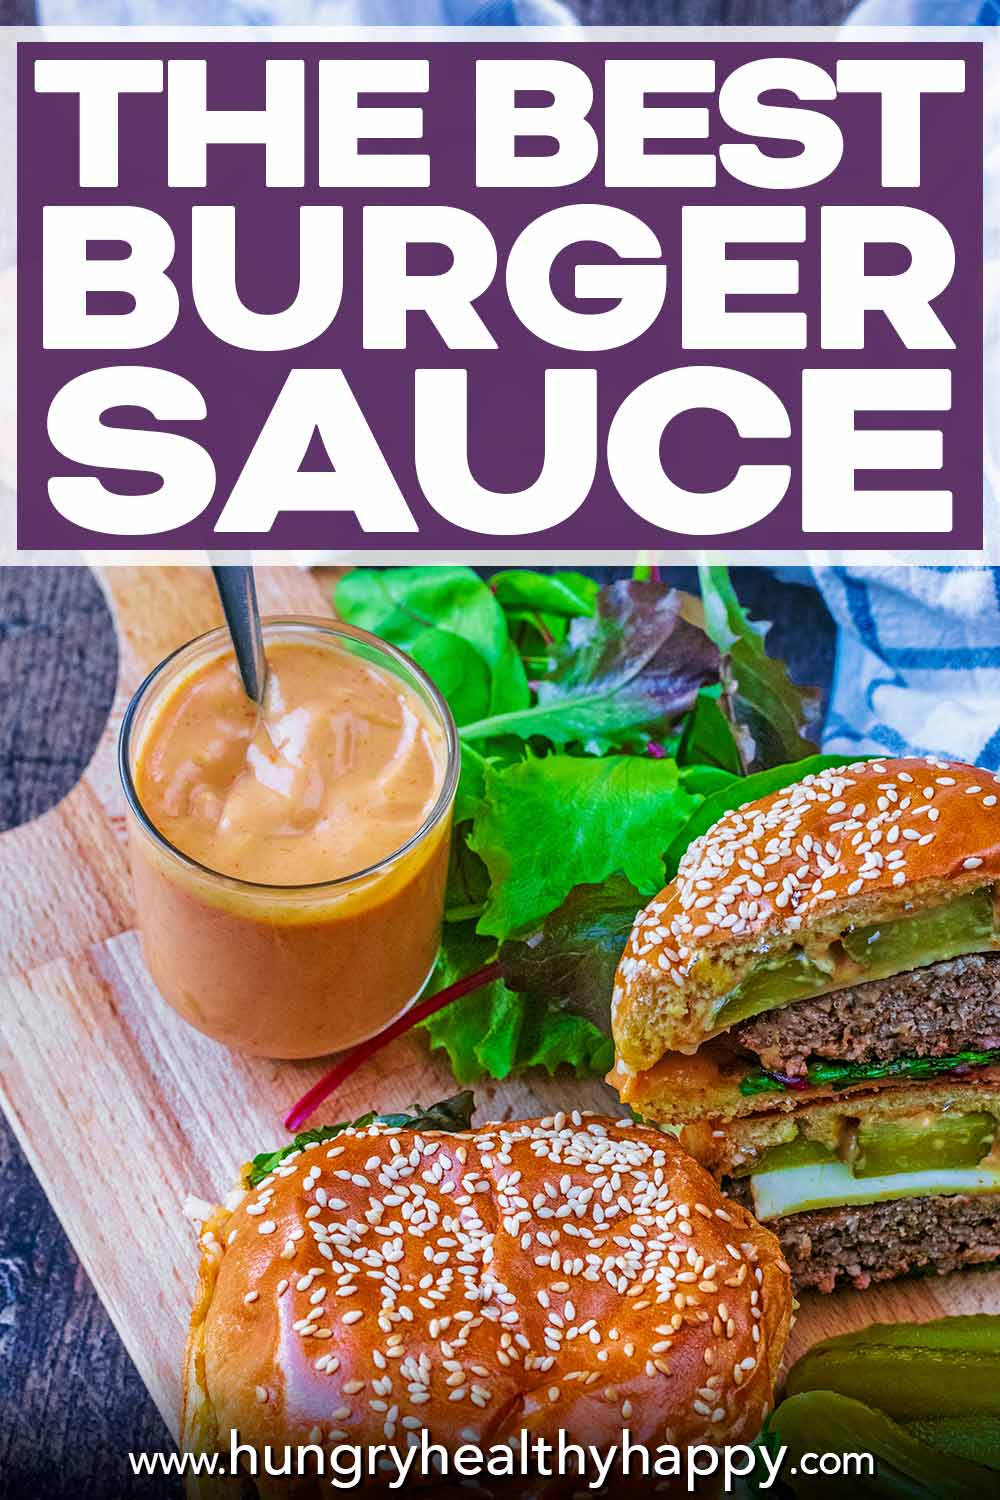 The Best Burger Sauce - Hungry Healthy Happy